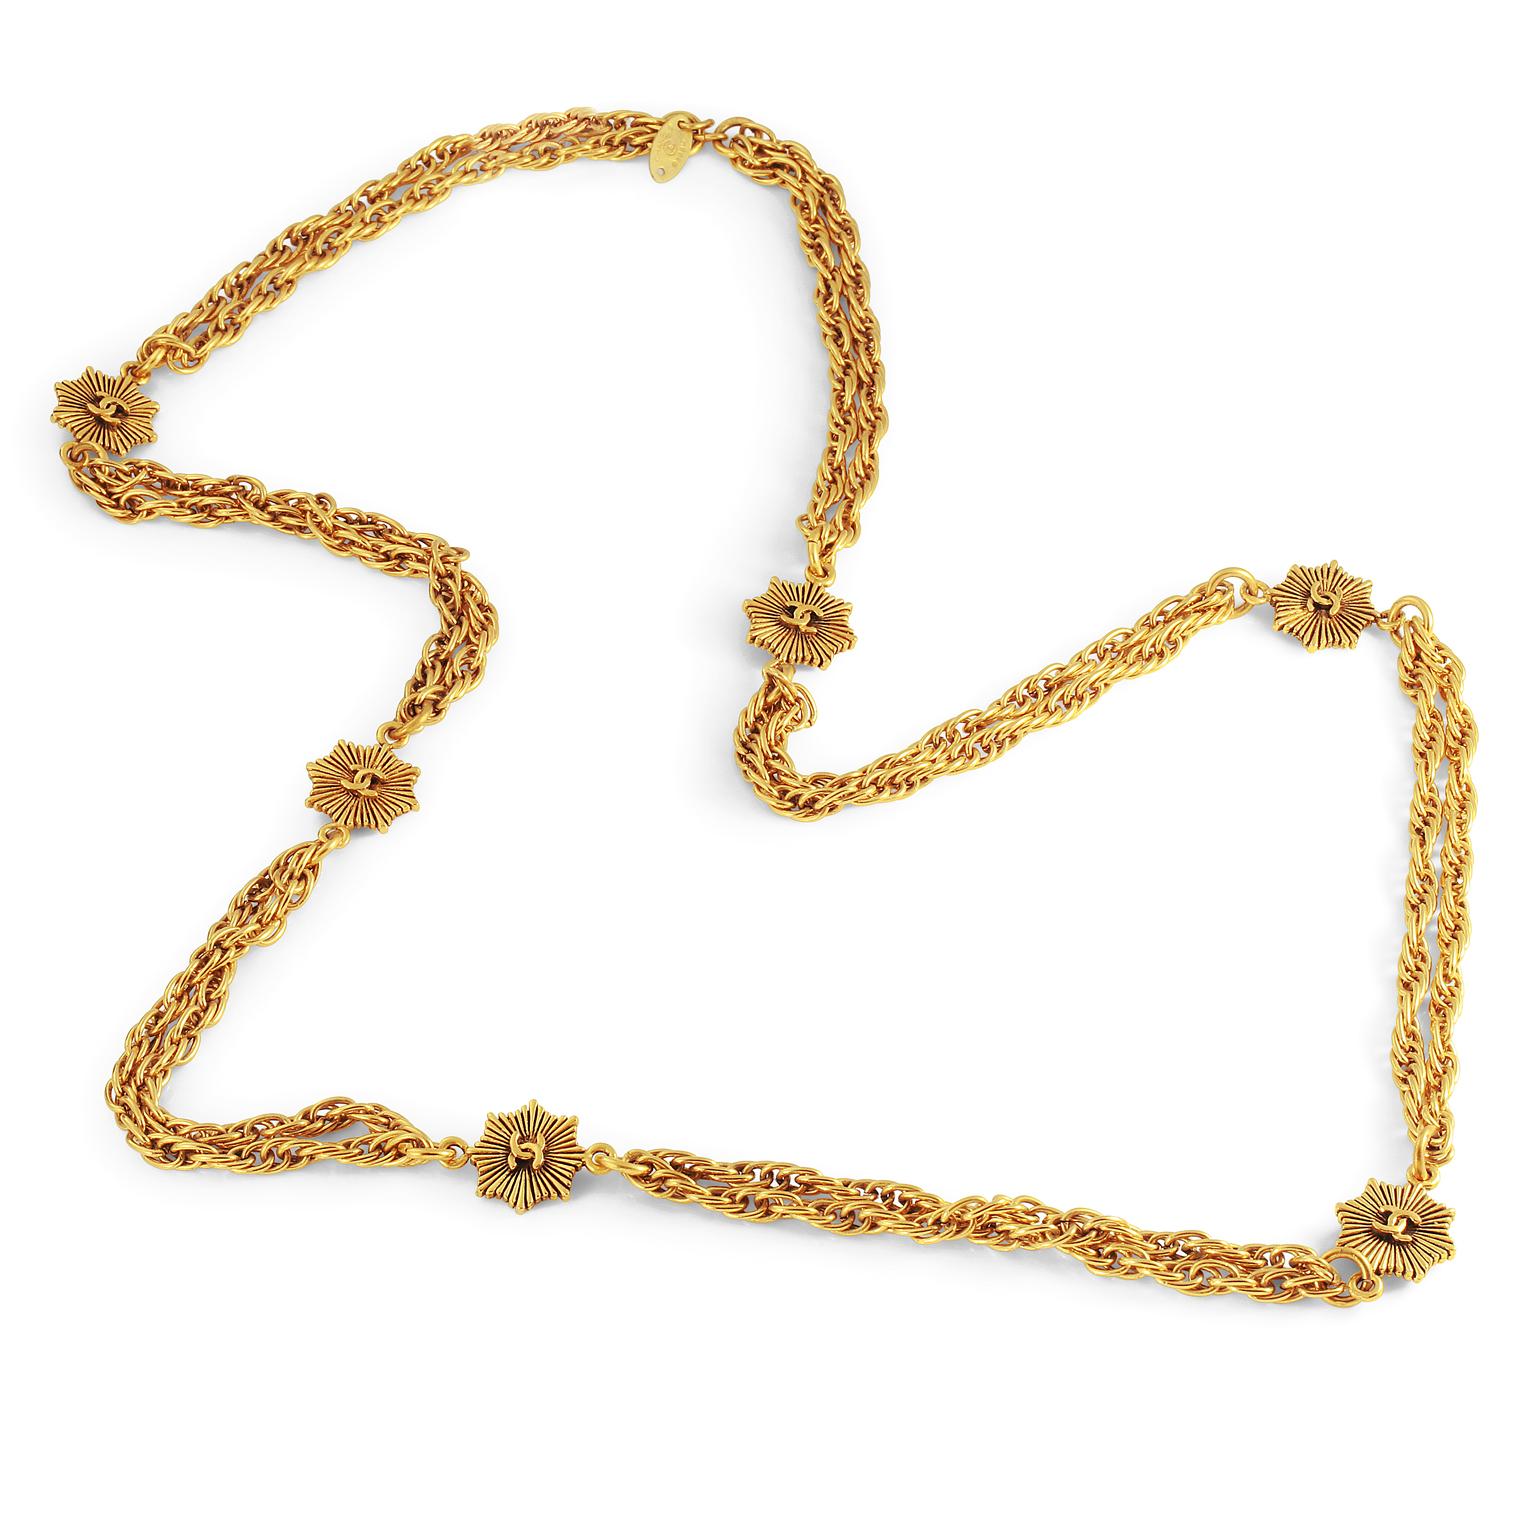 This authentic Chanel Gold Chain with CC Pendants is in excellent vintage condition from the 1984 collection.  Double stranded gold linked long chain has six CC starburst pendants stationed throughout.   34” approximately. Made in France.  Pouch or